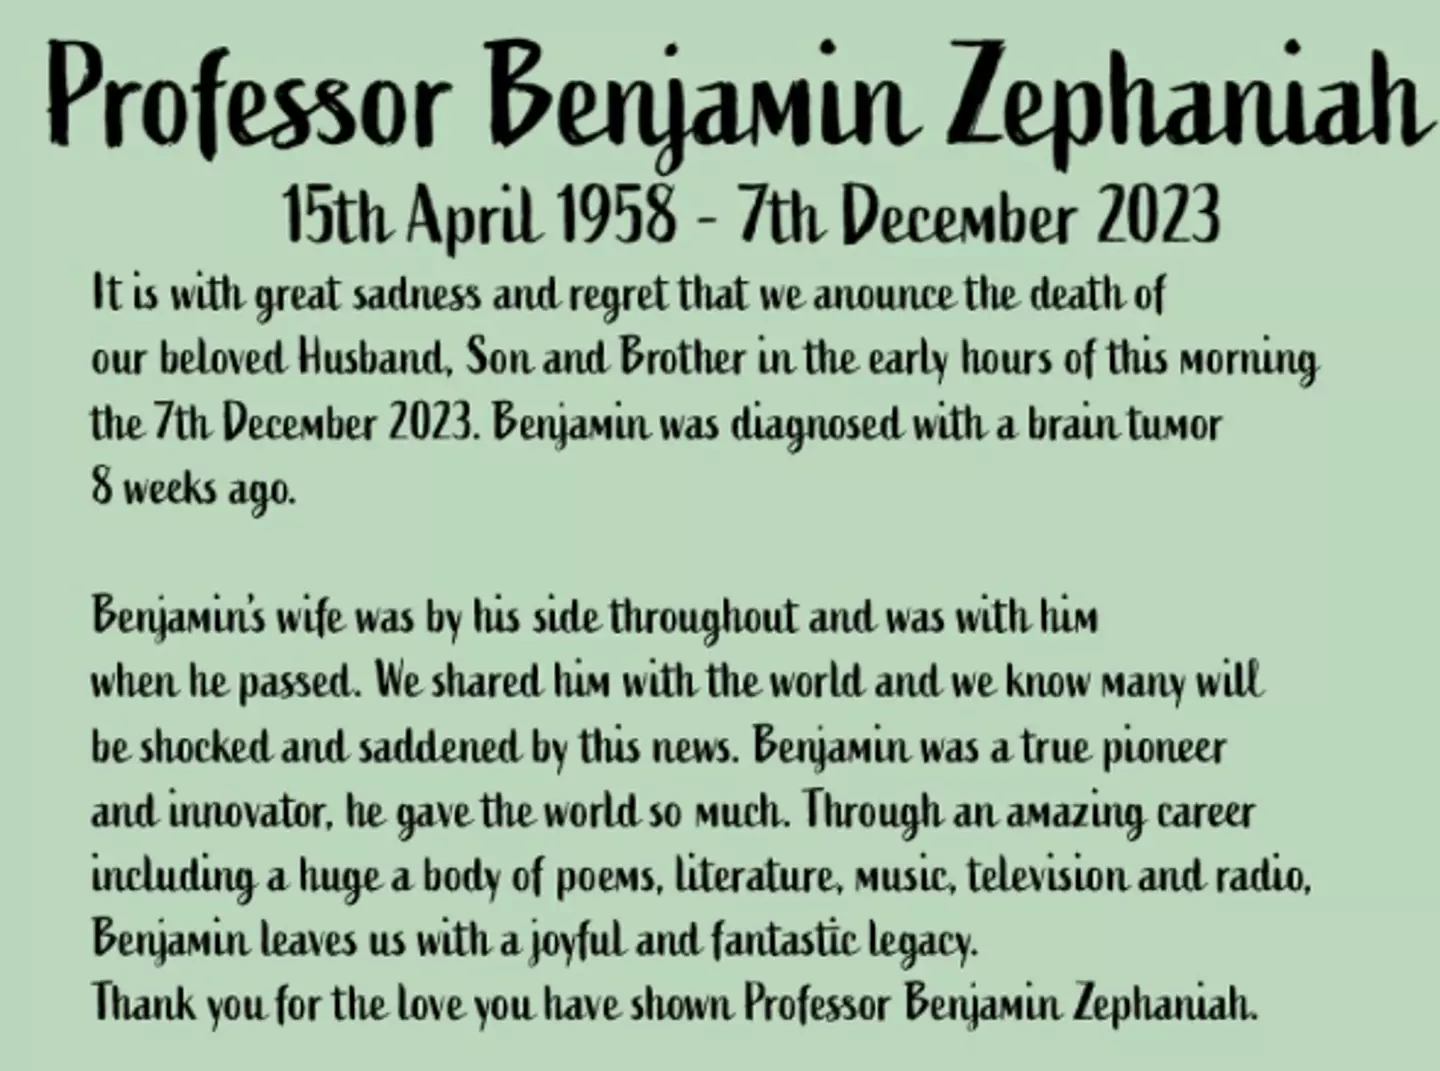 His family said he passed in the early hours of 7 December 2023.